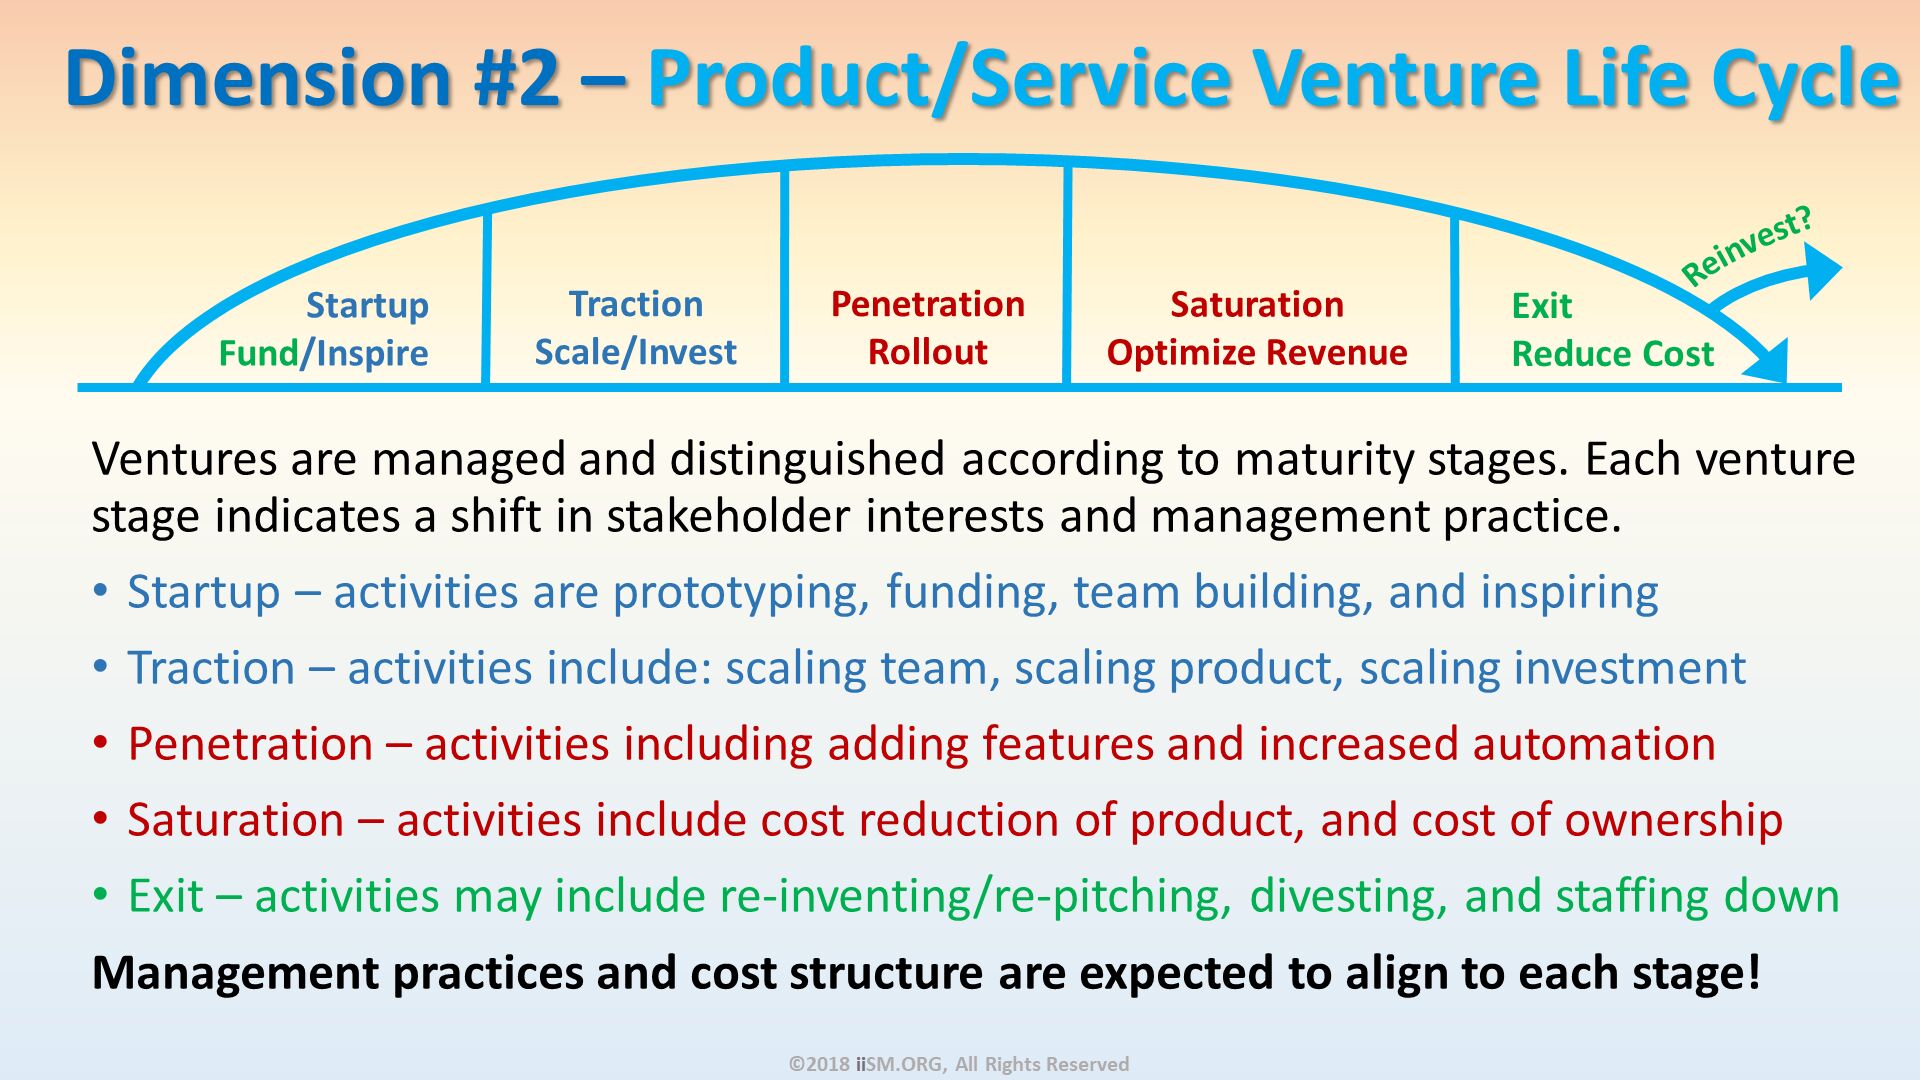 Dimension #2 – Product/Service Venture Life Cycle . Ventures are managed and distinguished according to maturity stages. Each venture stage indicates a shift in stakeholder interests and management practice.
Startup – activities are prototyping, funding, team building, and inspiring
Traction – activities include: scaling team, scaling product, scaling investment
Penetration – activities including adding features and increased automation
Saturation – activities include cost reduction of product, and cost of ownership
Exit – activities may include re-inventing/re-pitching, divesting, and staffing down
Management practices and cost structure are expected to align to each stage!  . ©2018 iiSM.ORG, All Rights Reserved. 